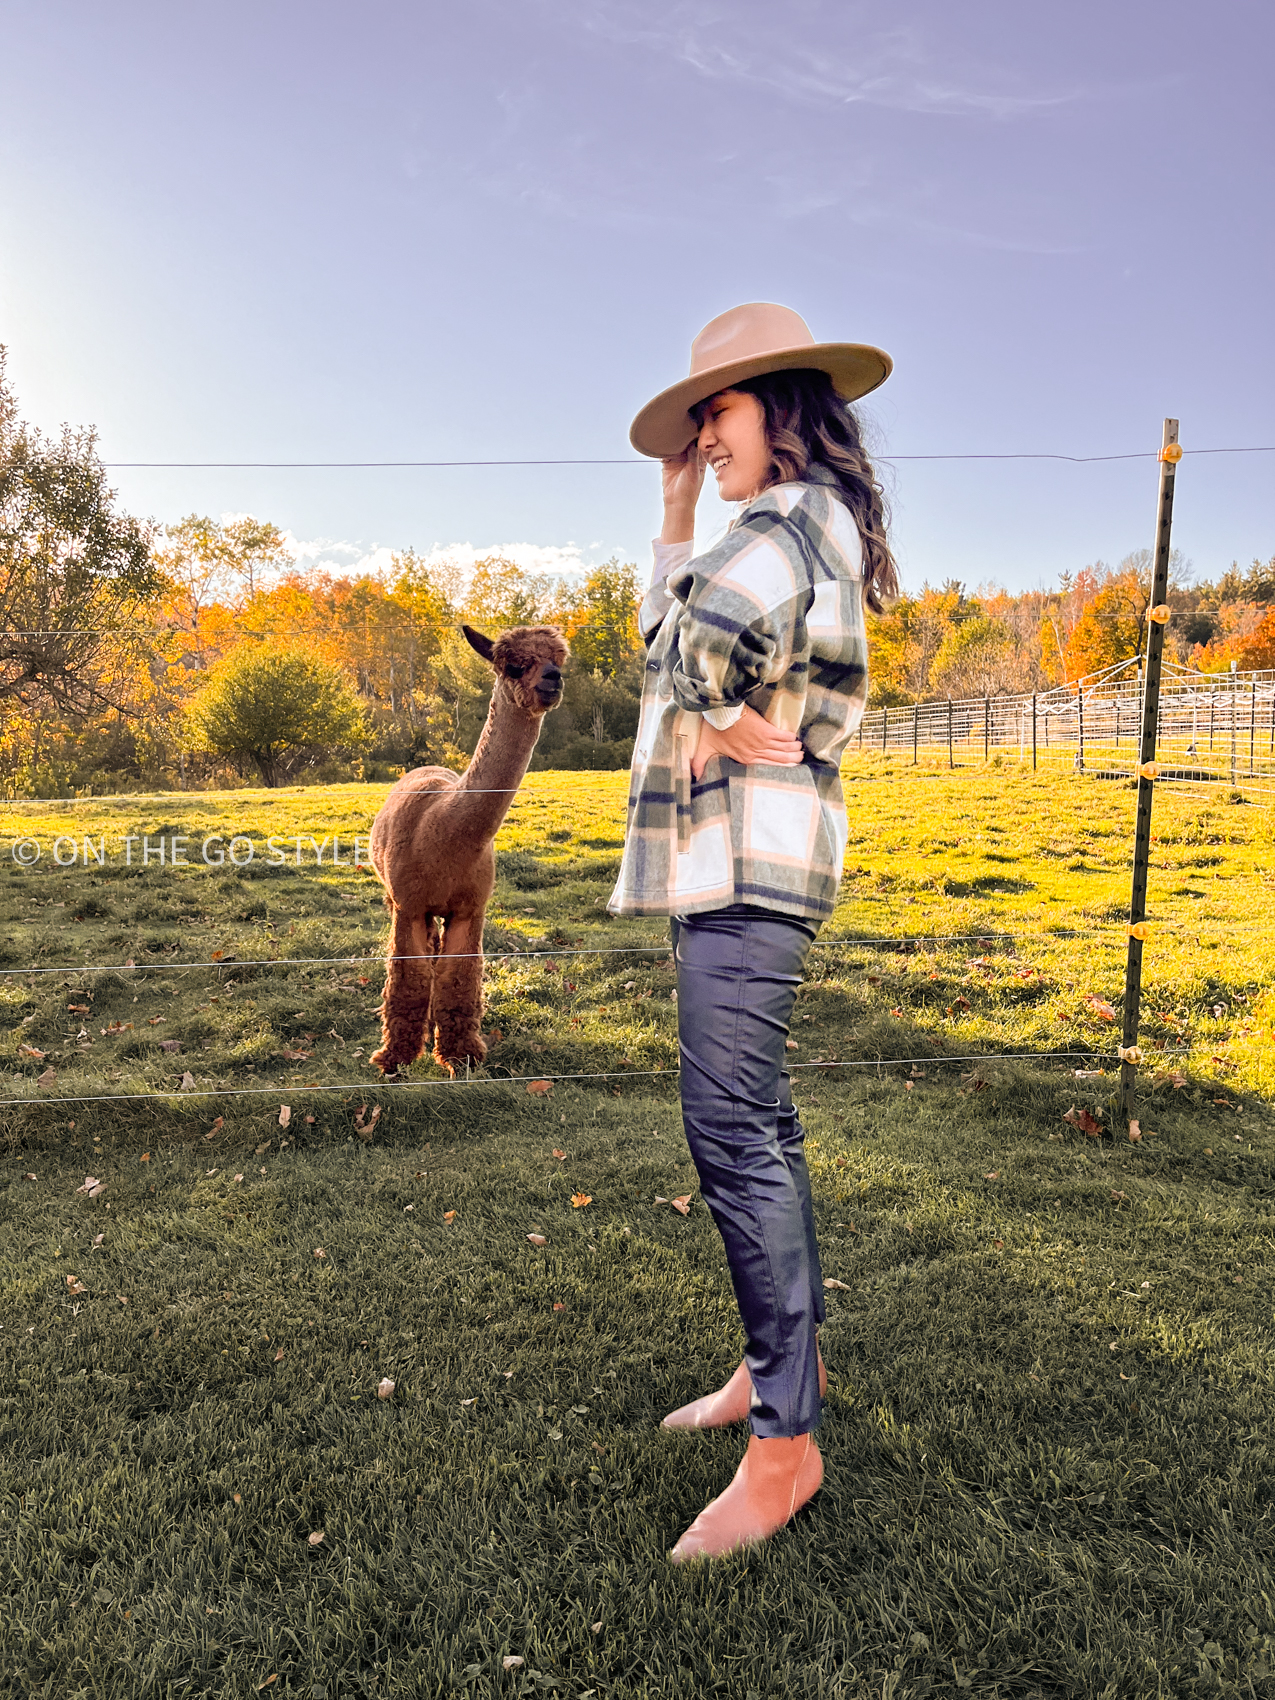 Alpaca petting farm fall outfit with plaid green cream shirt and tan hat